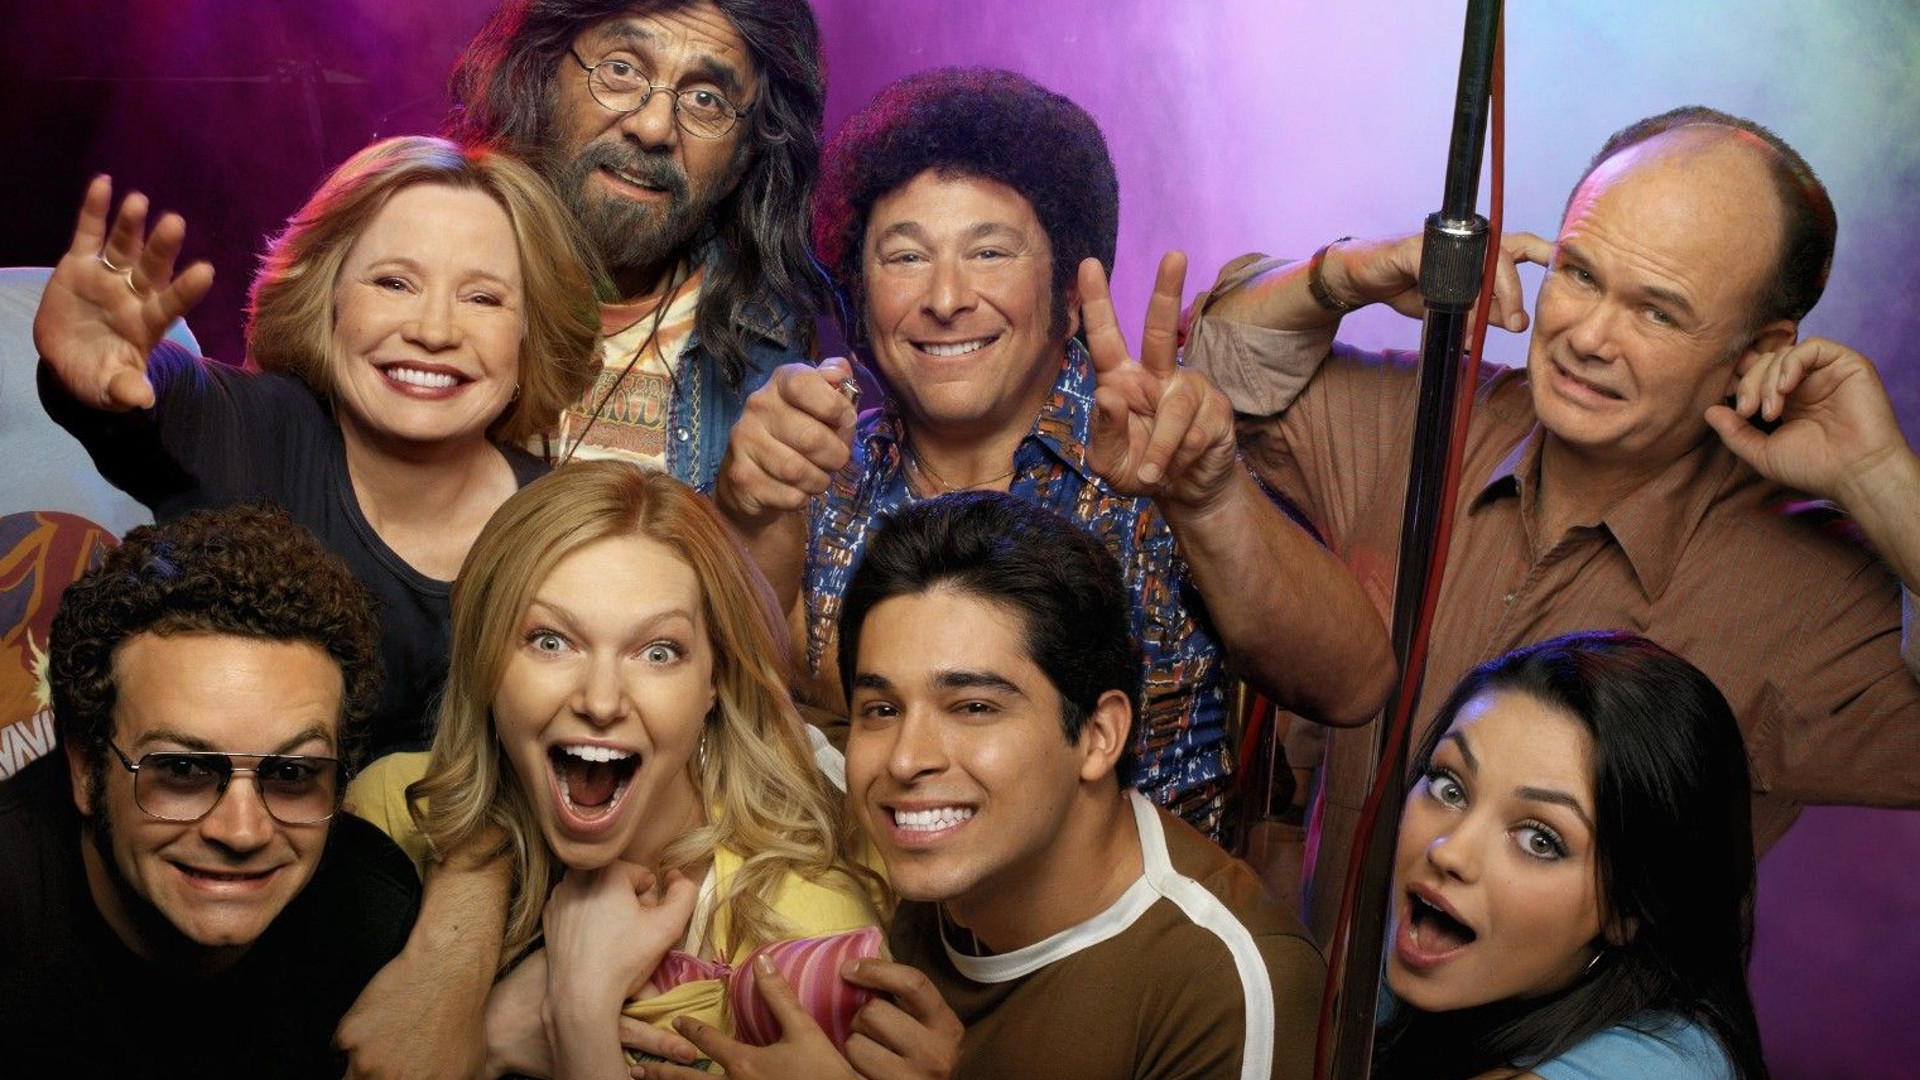 That '70s Show #6